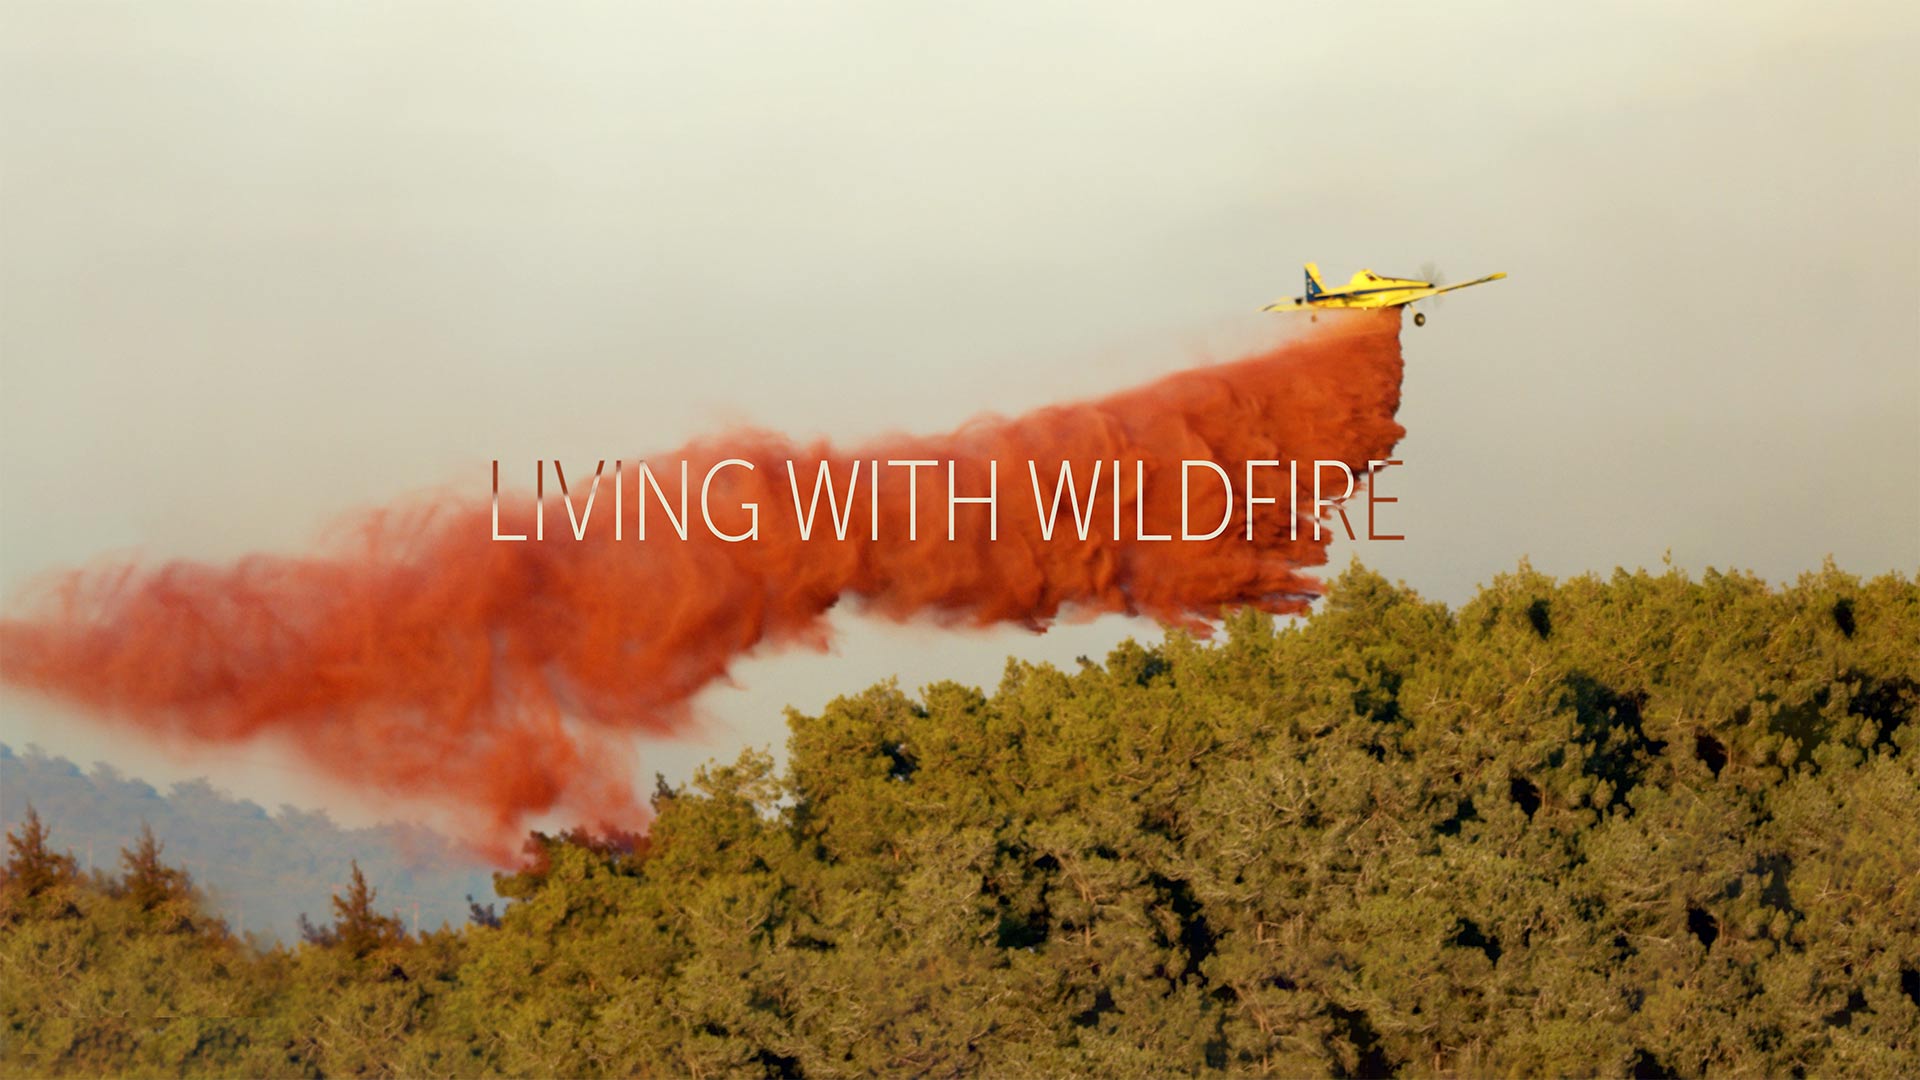 Living with wildfire